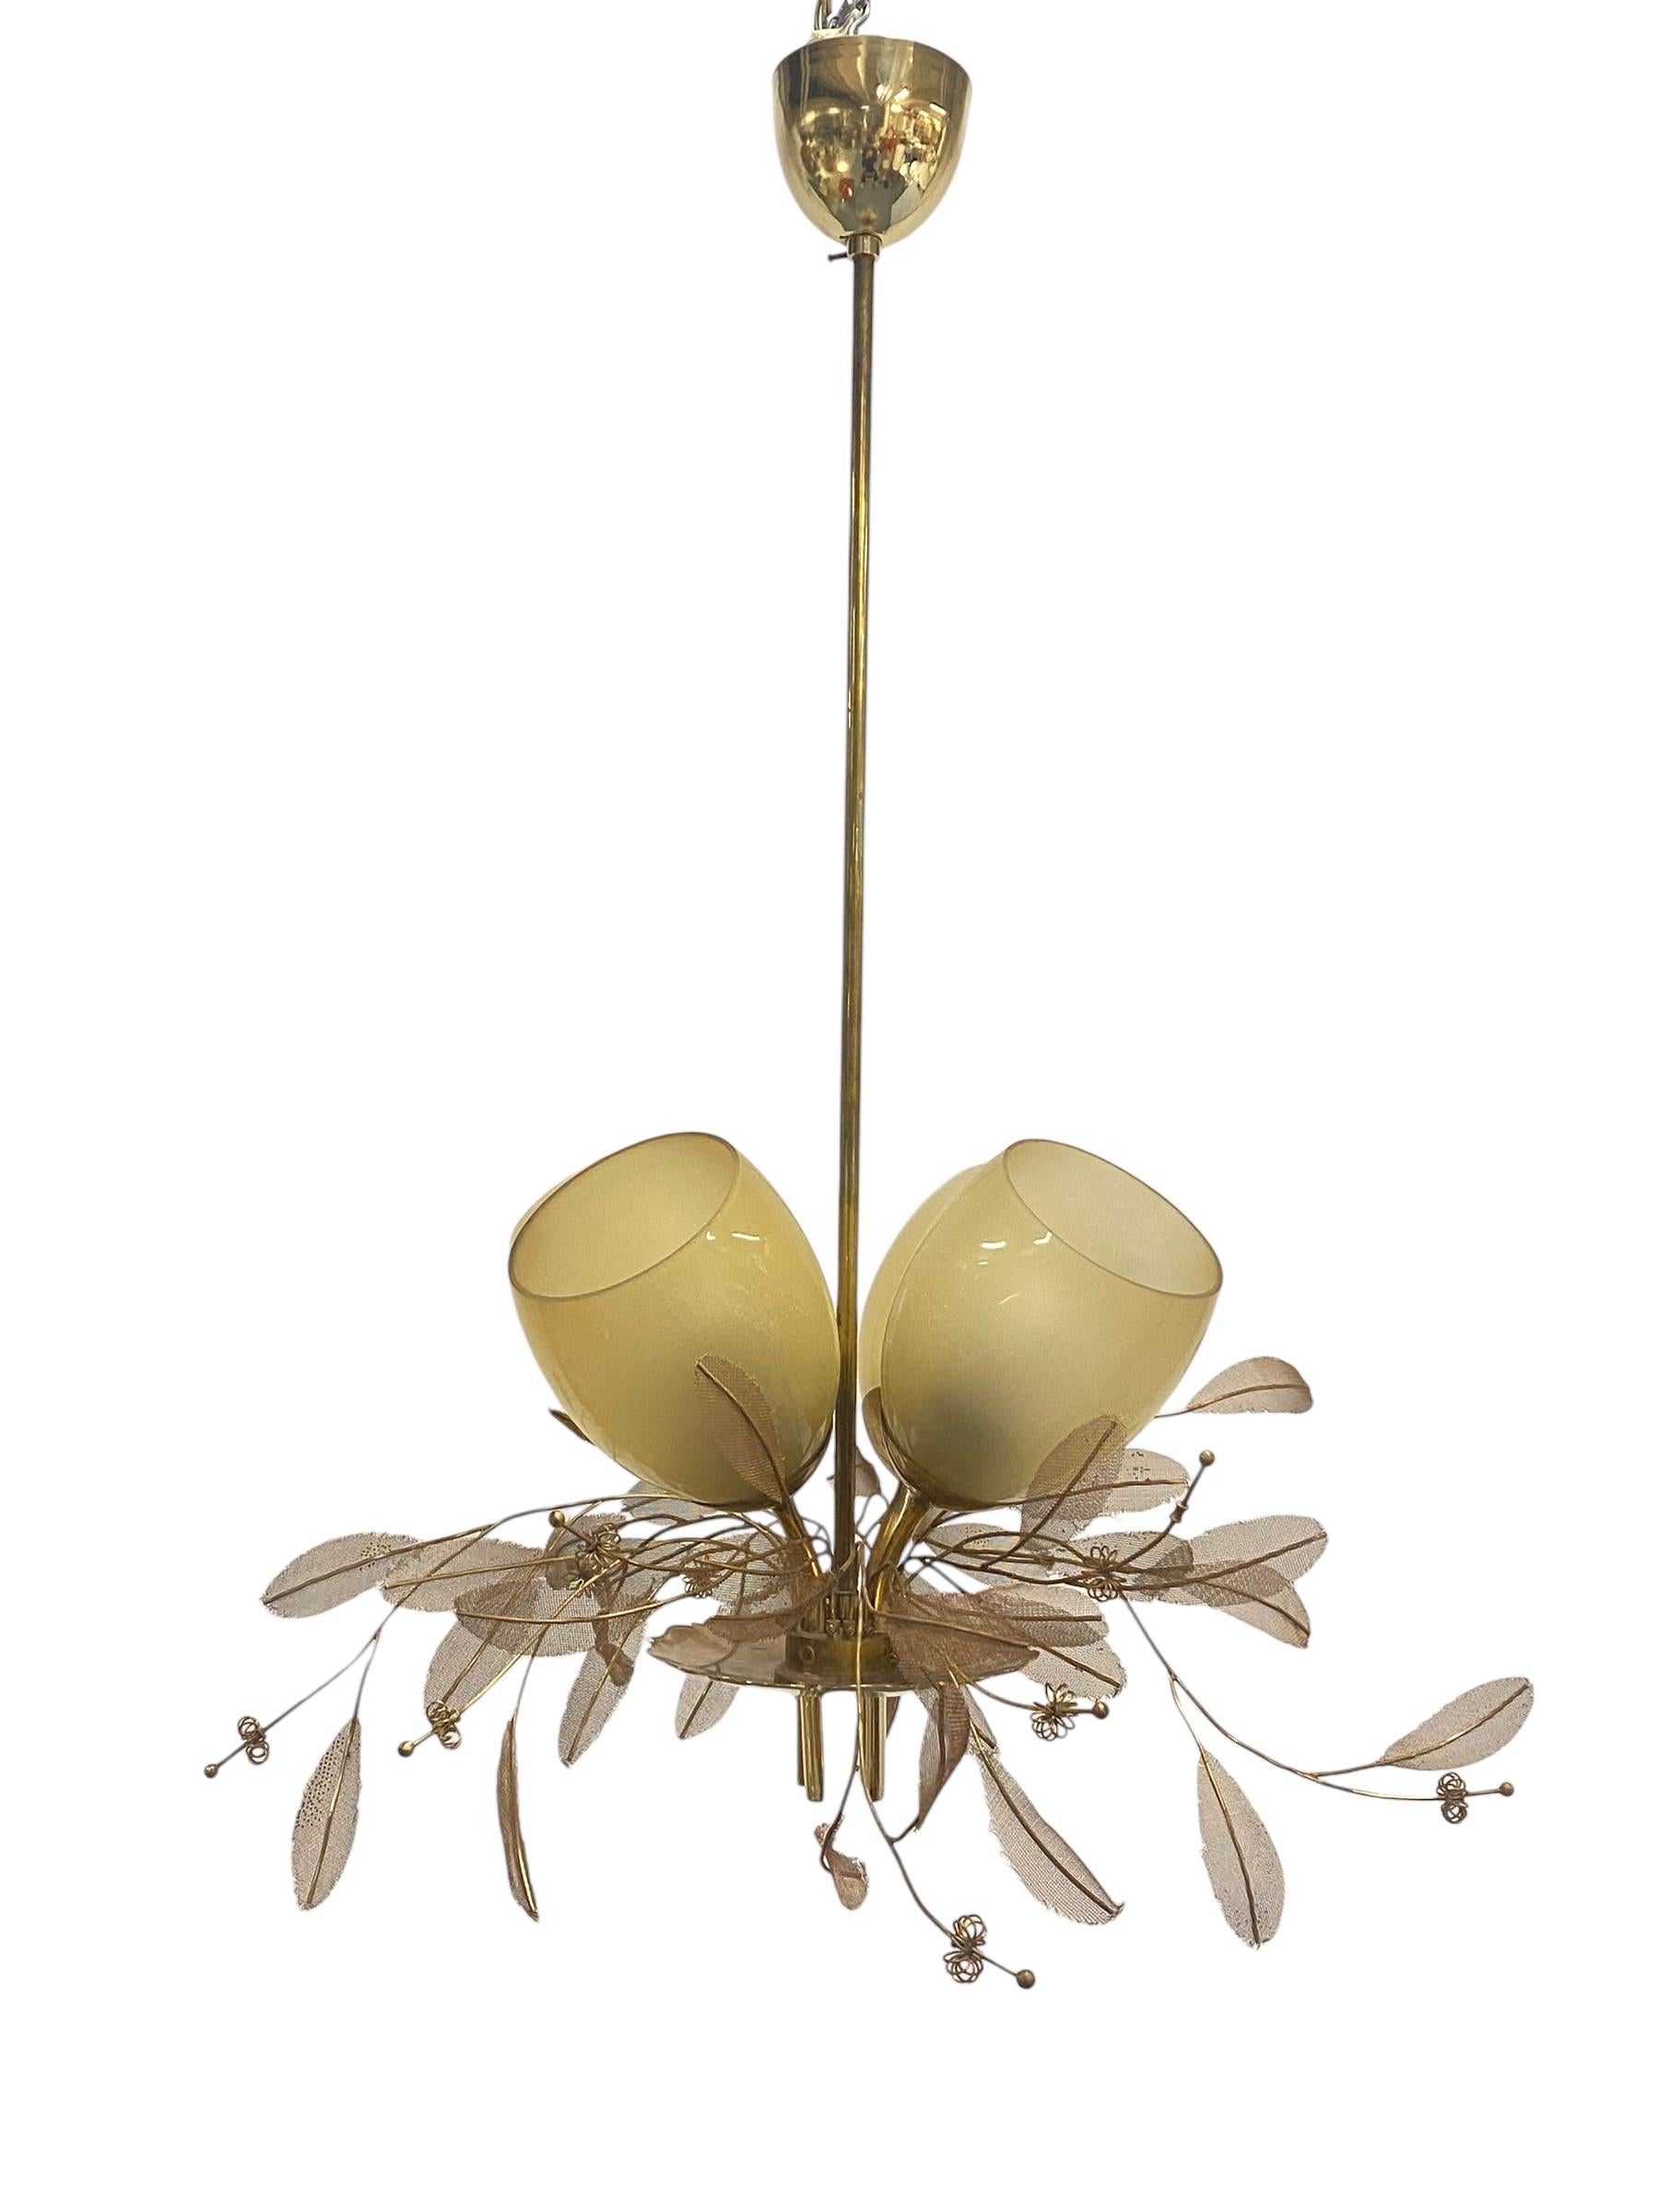 Finnish Paavo Tynell Chandelier model 9029/4, Taito Oy 1950s For Sale